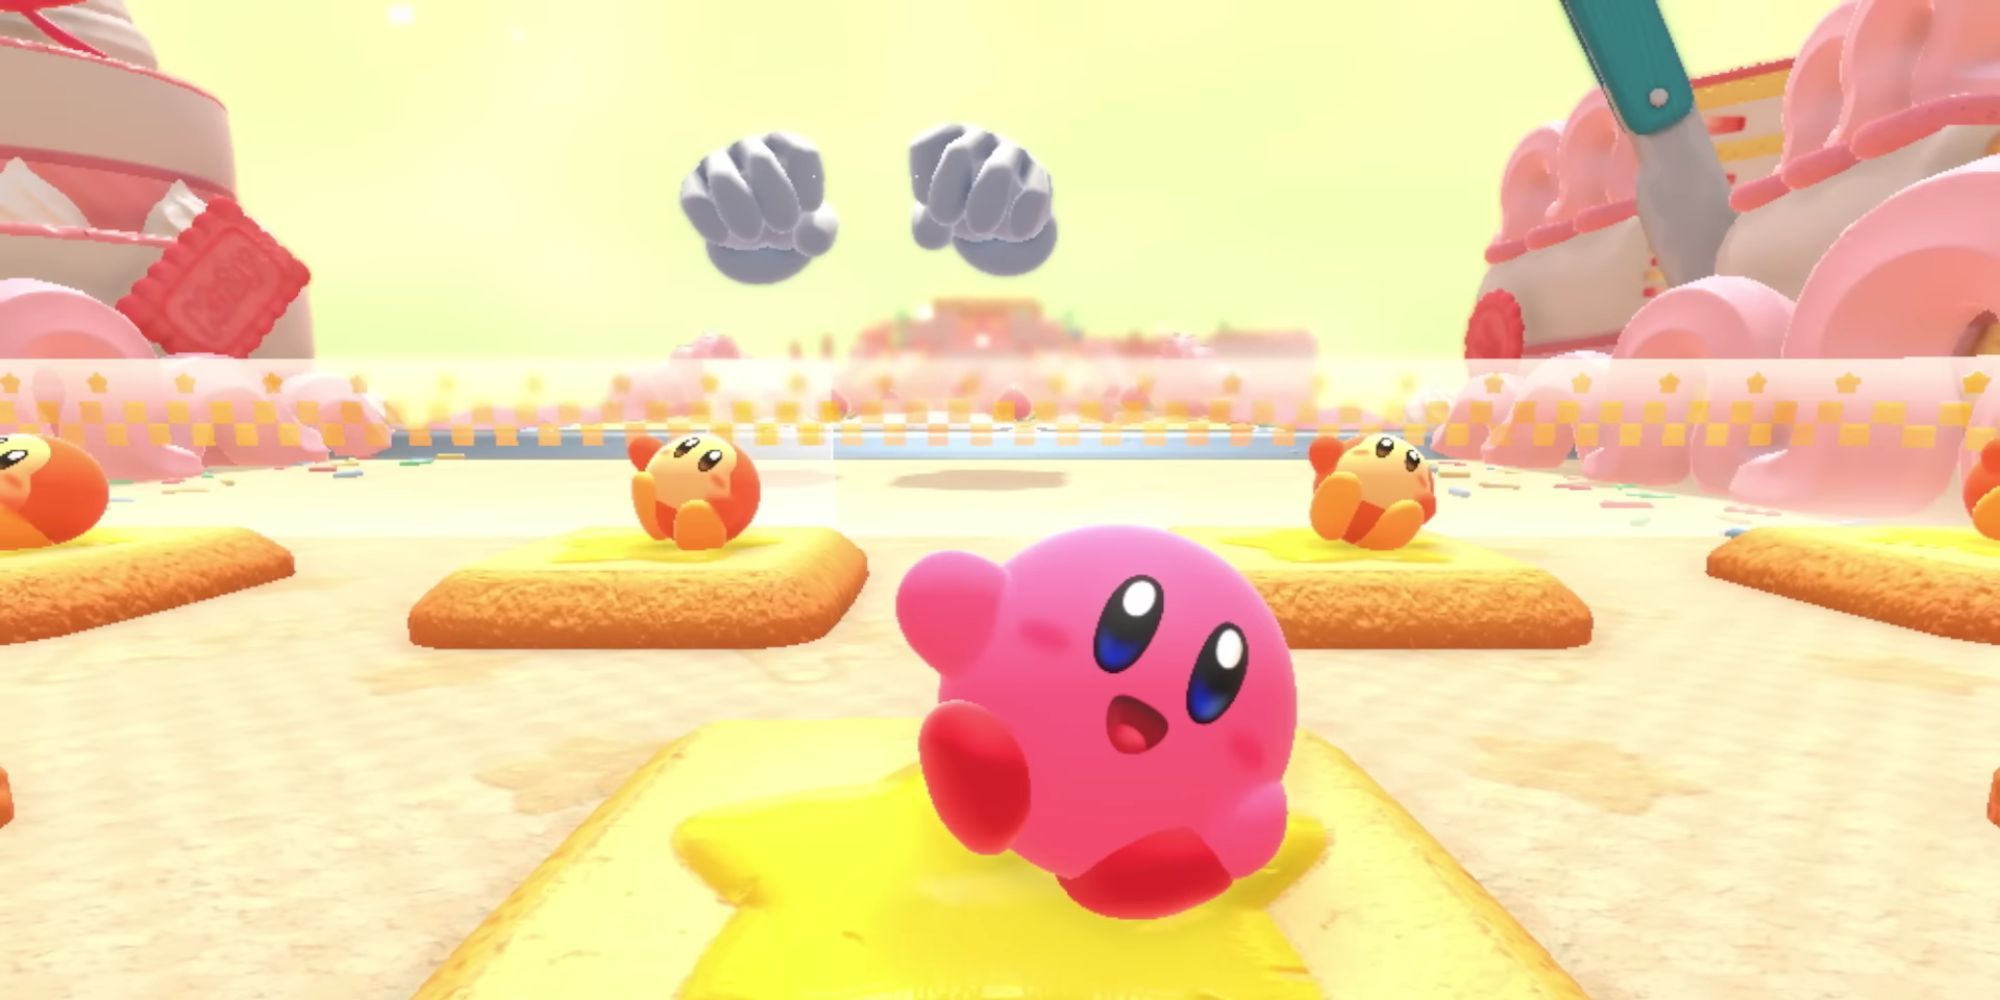 Kirby fans think they've spotted Master's hand from Super Smash Bros. In Kirby's Dream Buffet